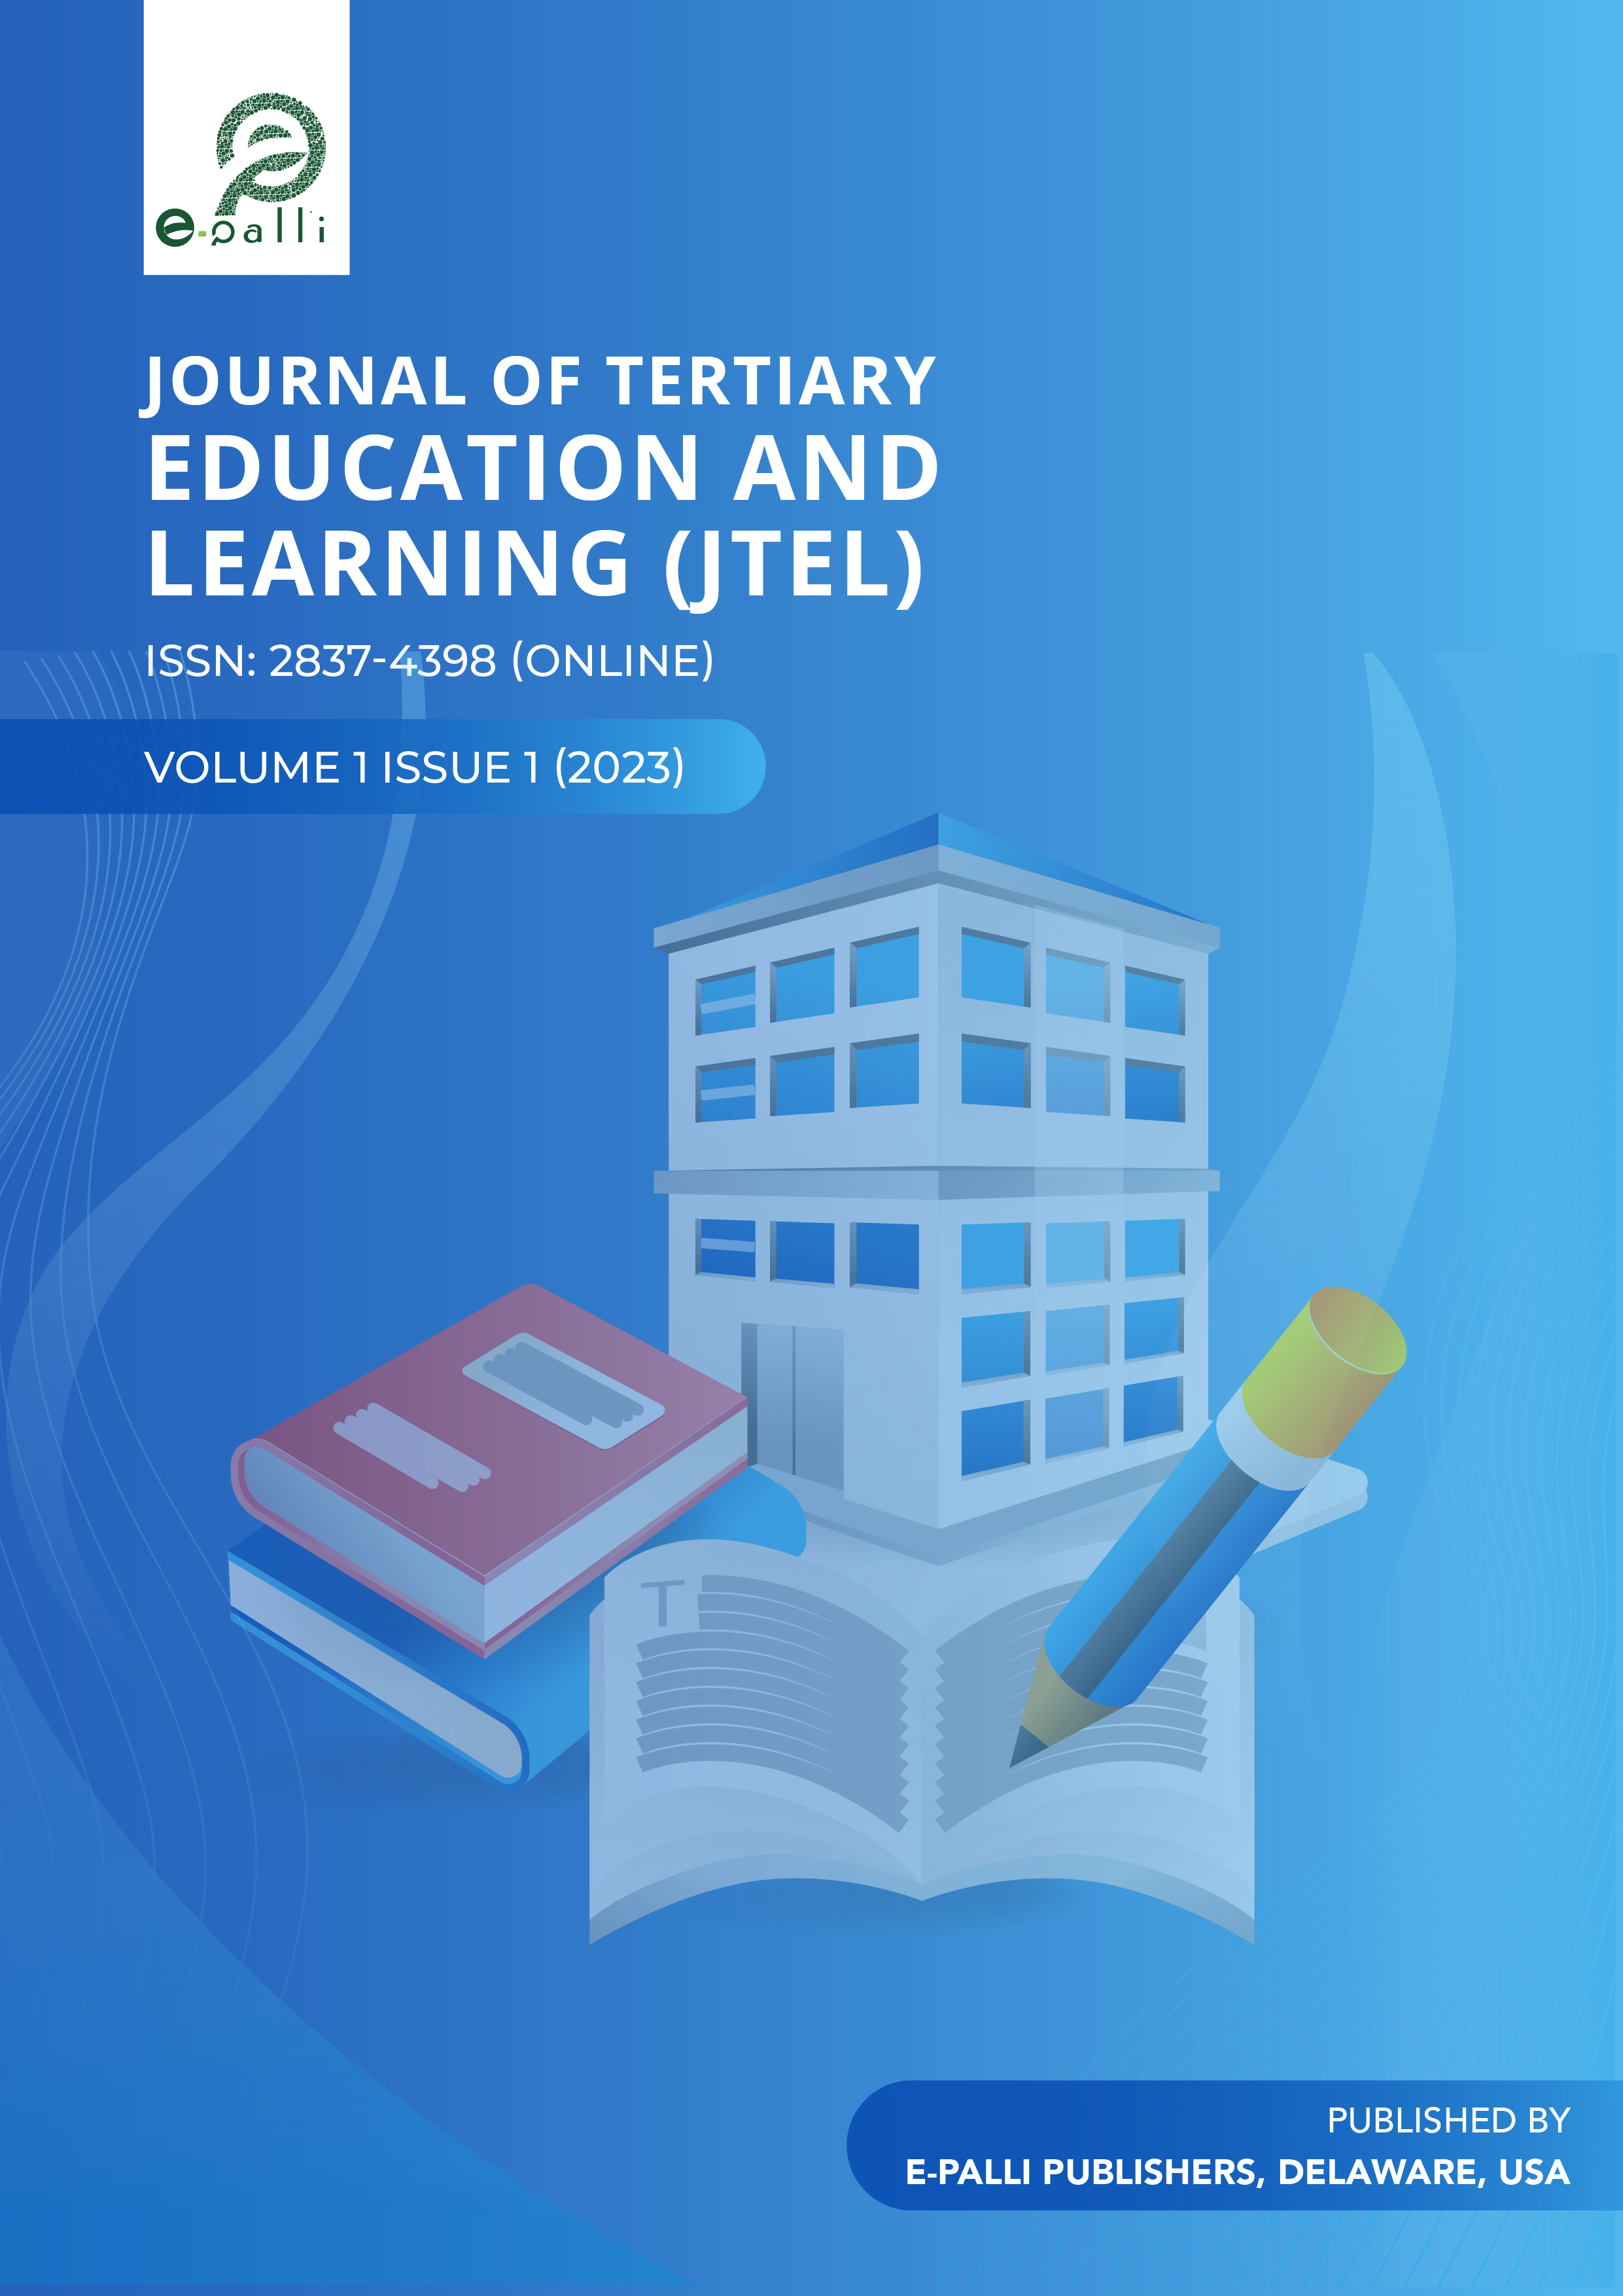 					View Vol. 1 No. 2 (2023): Journal of Tertiary Education and Learning
				